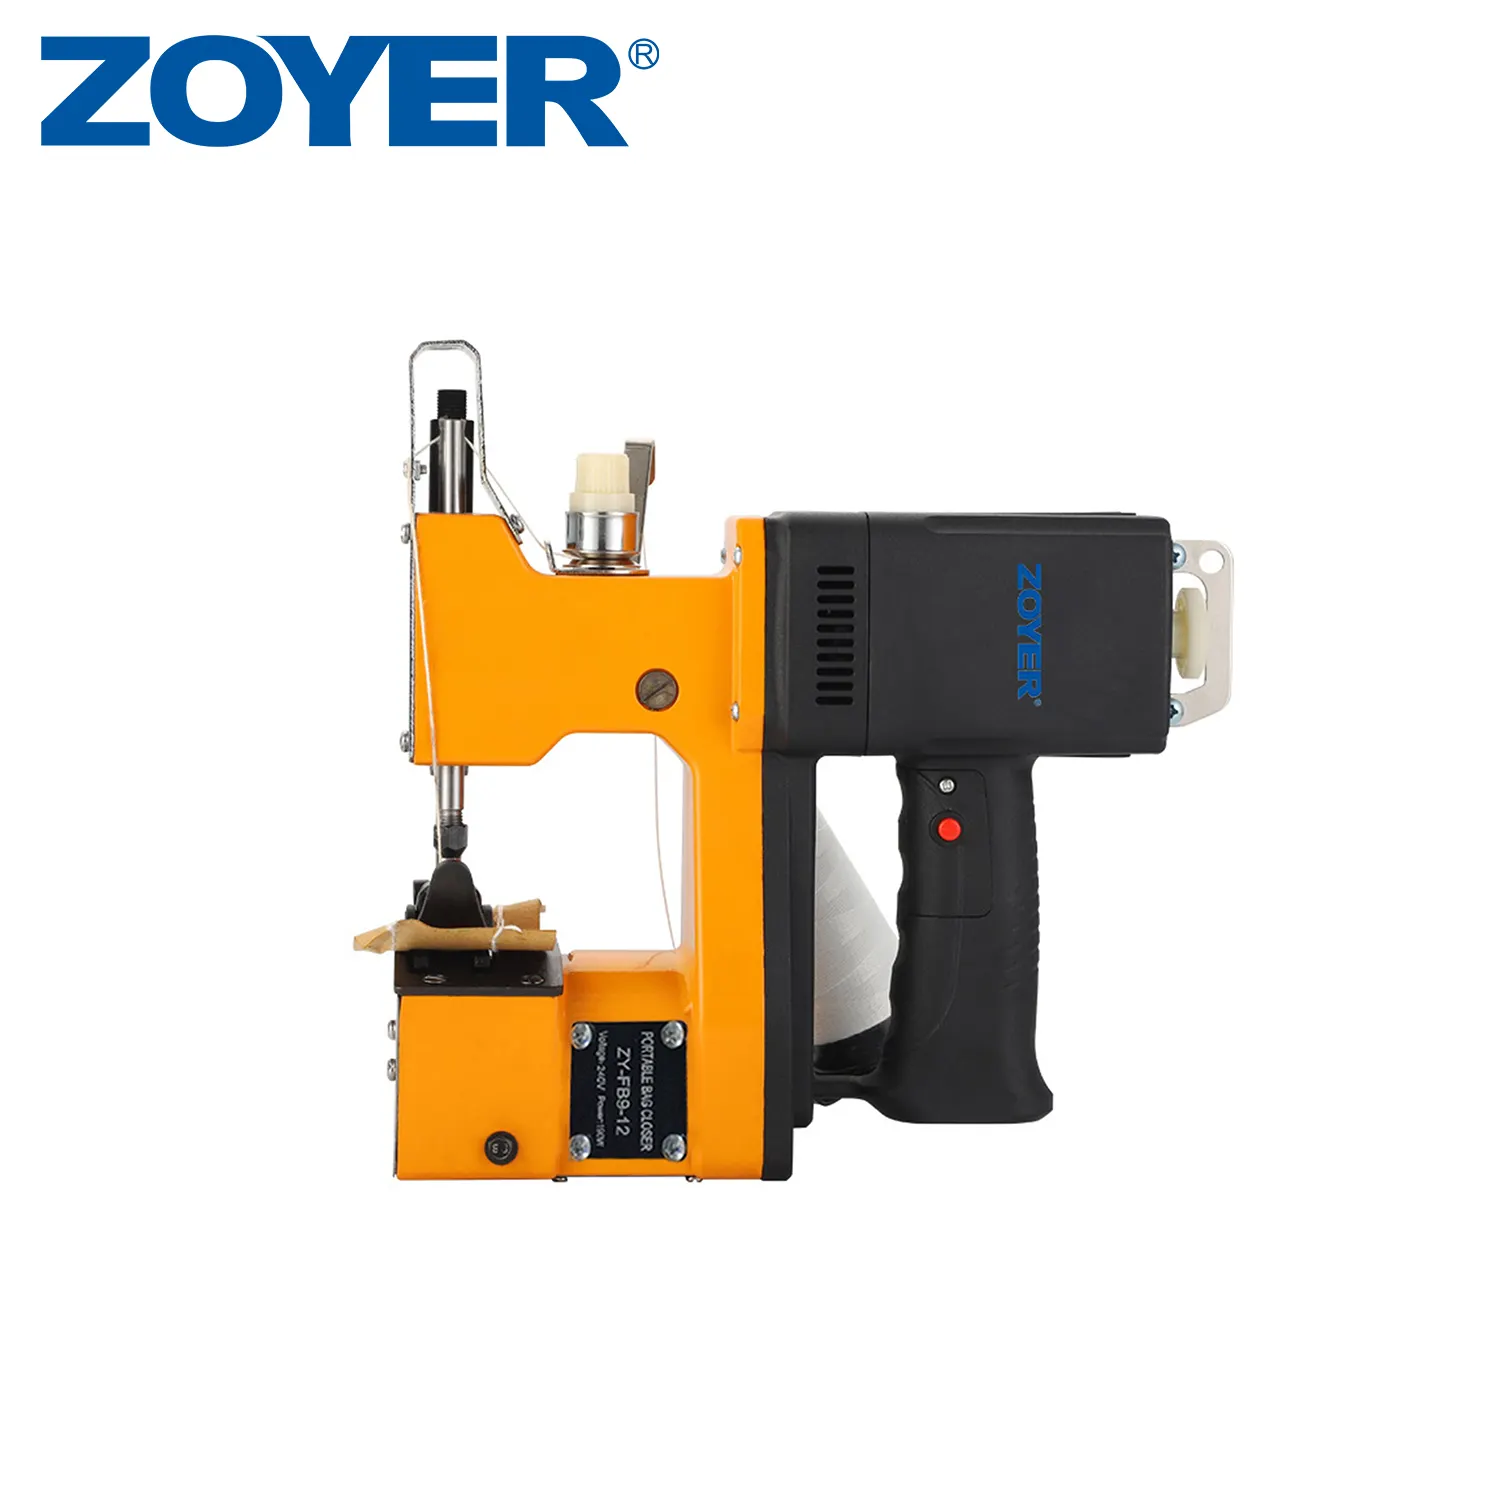 ZOYER ZY-FB9-12 Industrial Portable Handheld Electric Bag Closer Healing Sewing Machine usd to make bags, sacks,Cloth bags